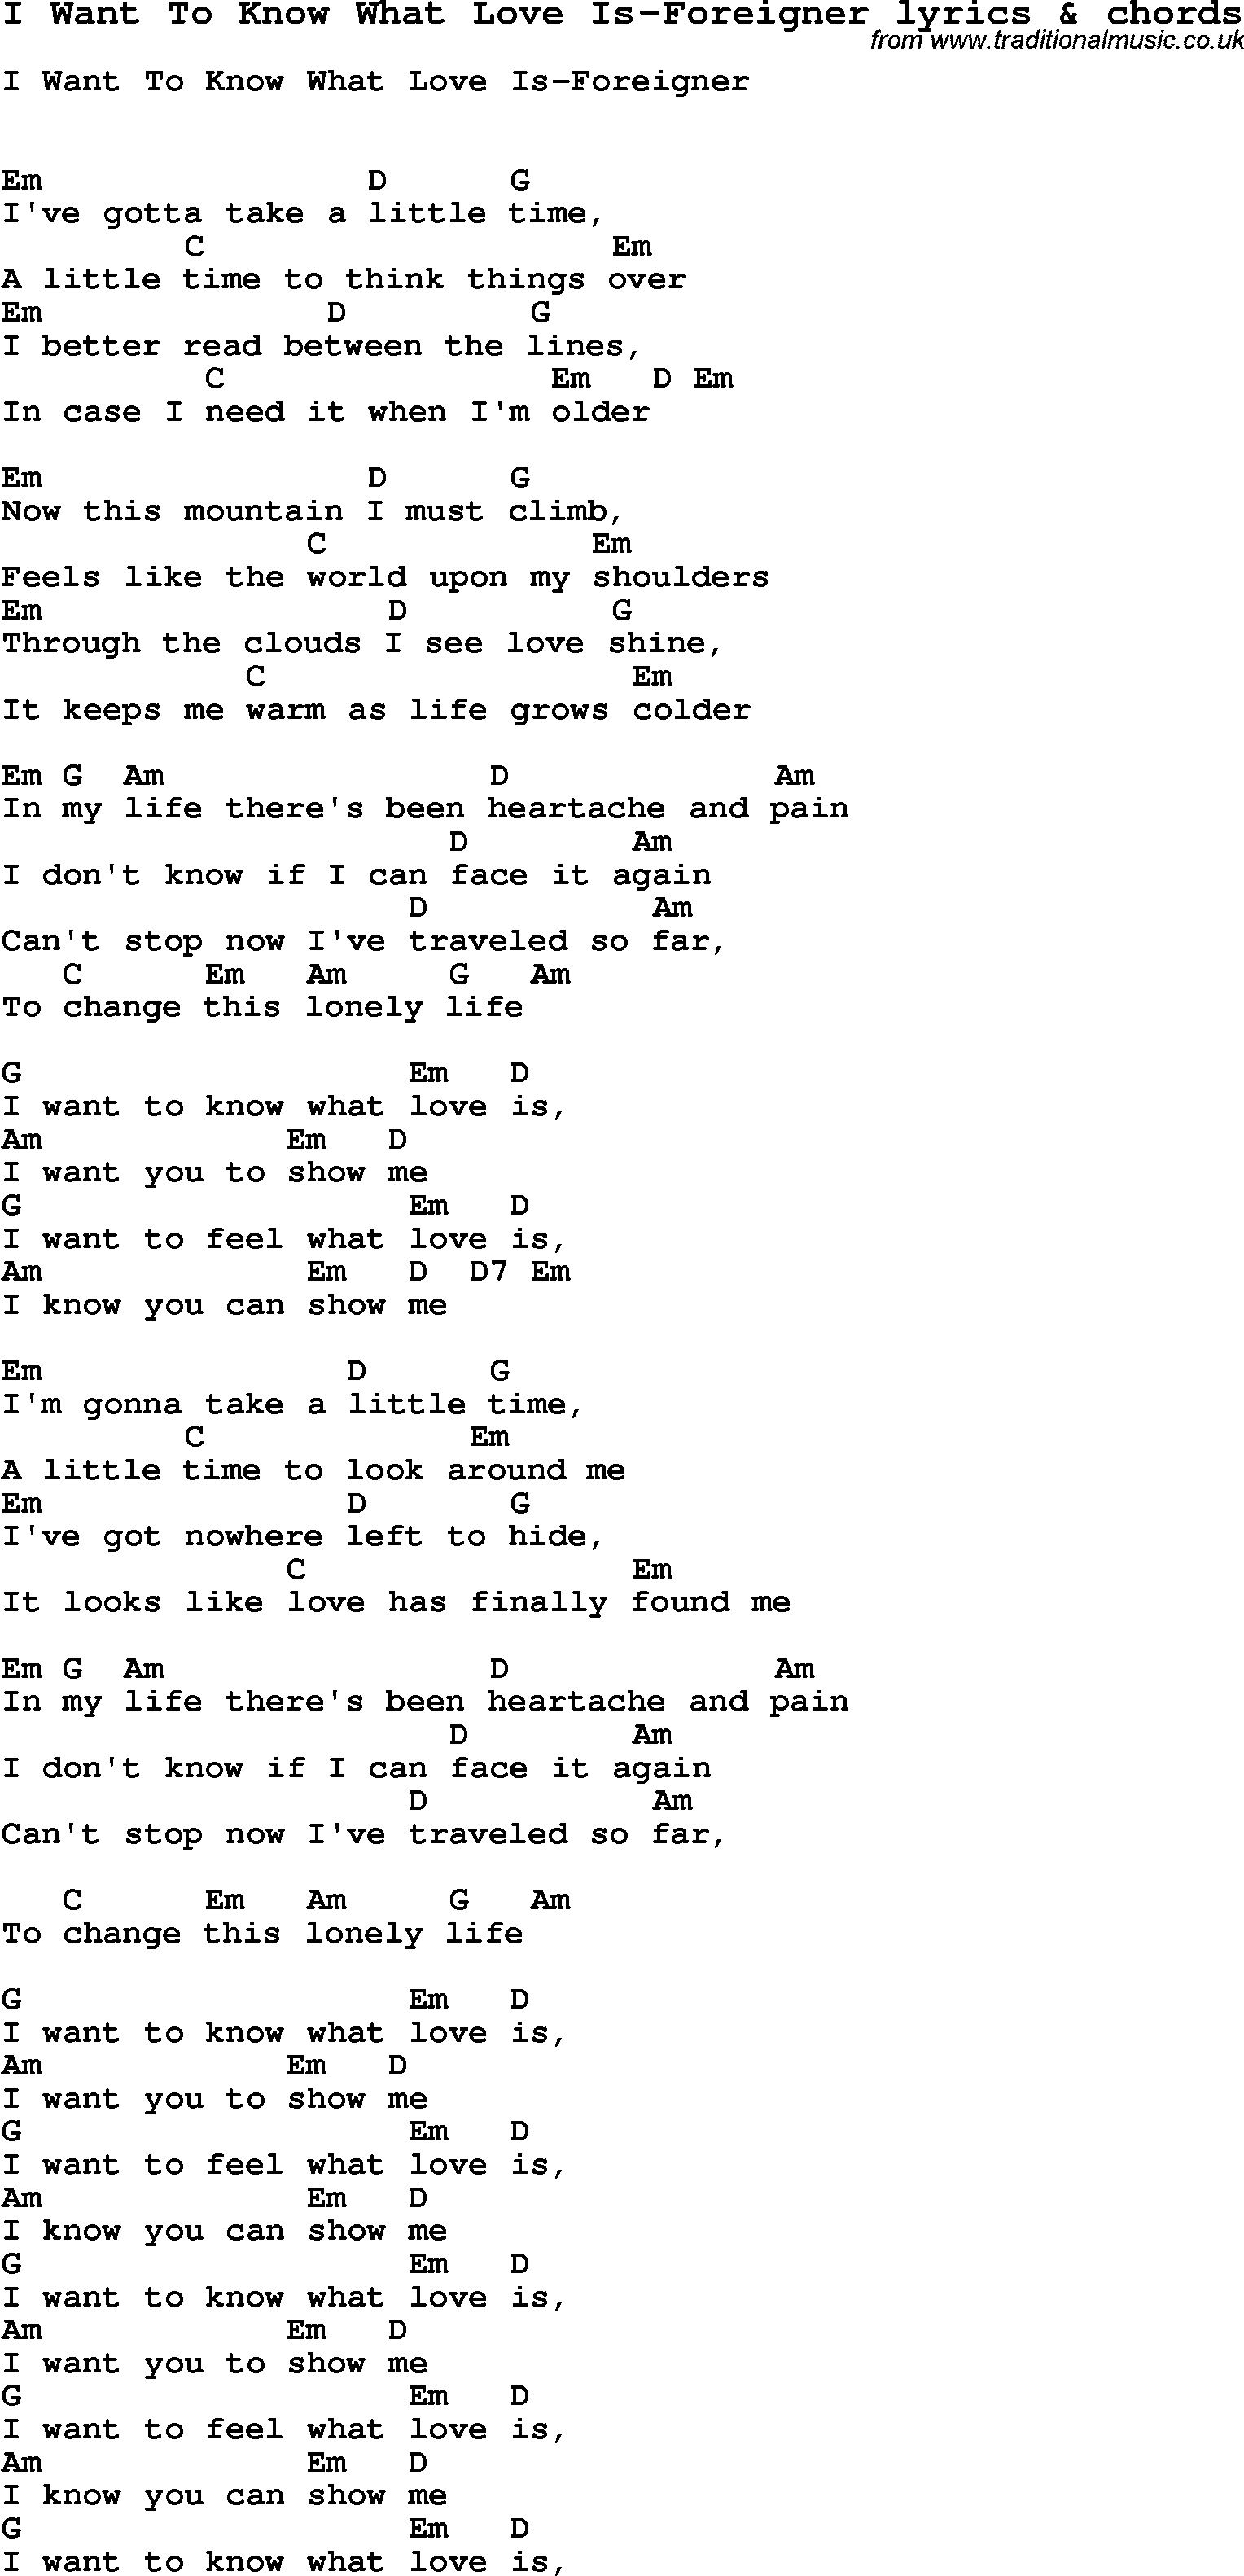 Love Song Lyrics for: I Want To Know What Love Is-Foreigner with chords for Ukulele, Guitar Banjo etc.